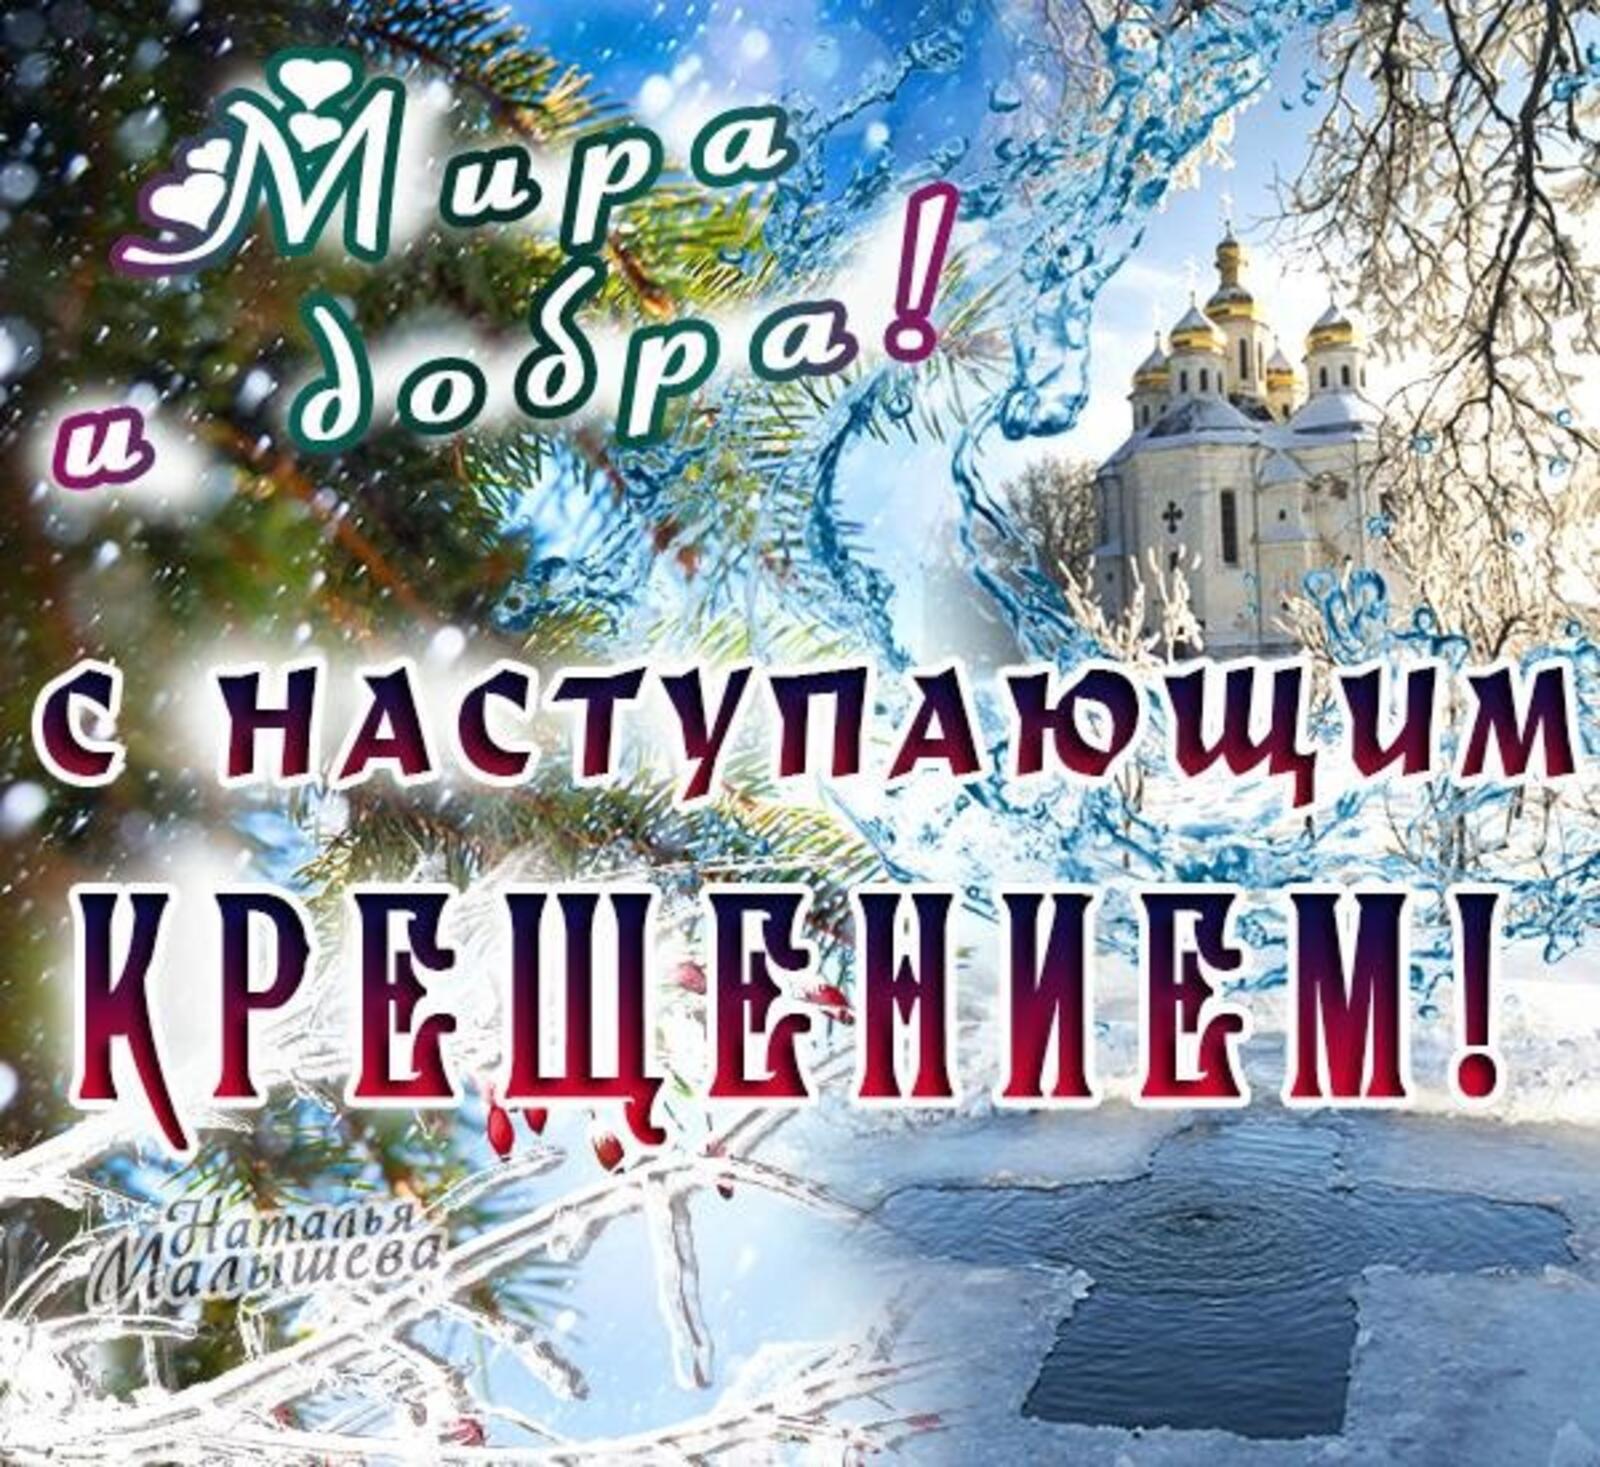 A postcard on the subject of happy baptism day pictures winter snow for free